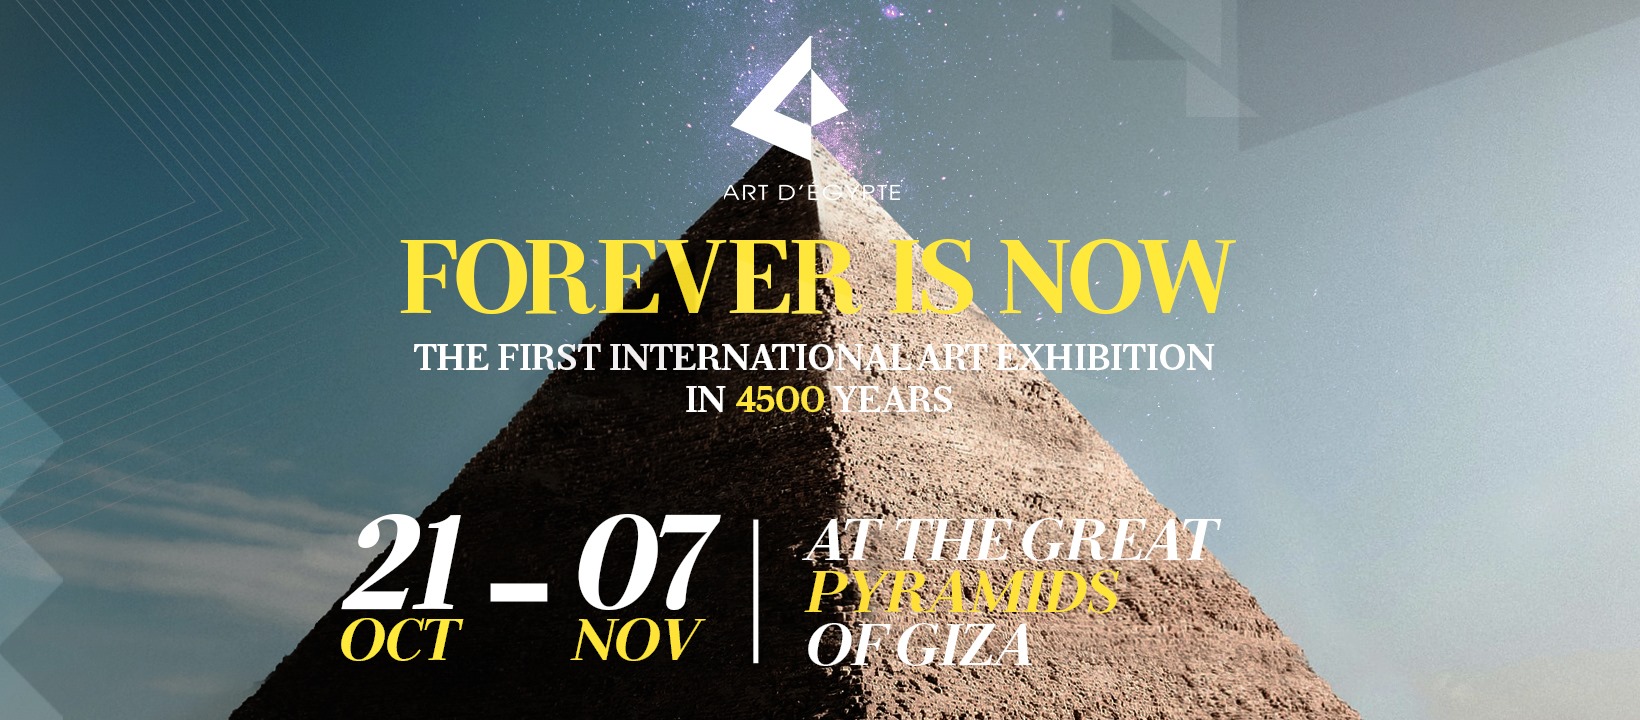 “Forever Is Now”: Egypt’s First Contemporary Art Exhibition at Giza Pyramids in 4500 Years